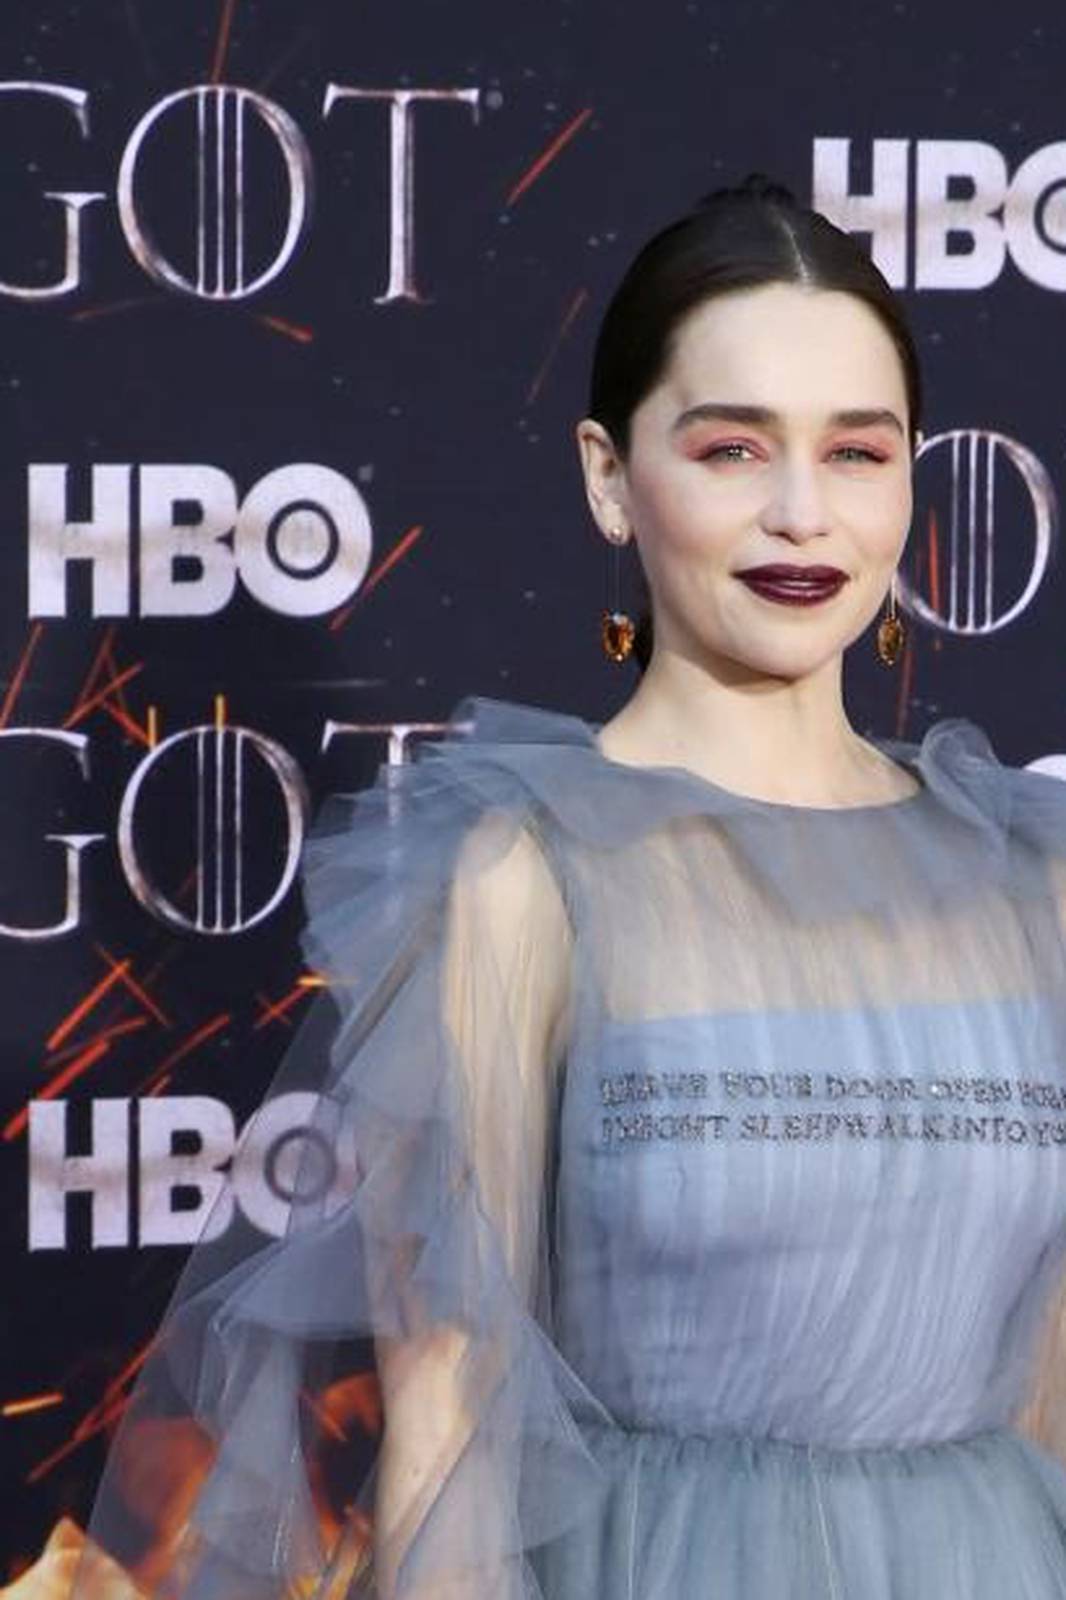 Emilia Clarke poses at the premiere of the final season of "Game of Thrones" at Radio City Music Hall in New York